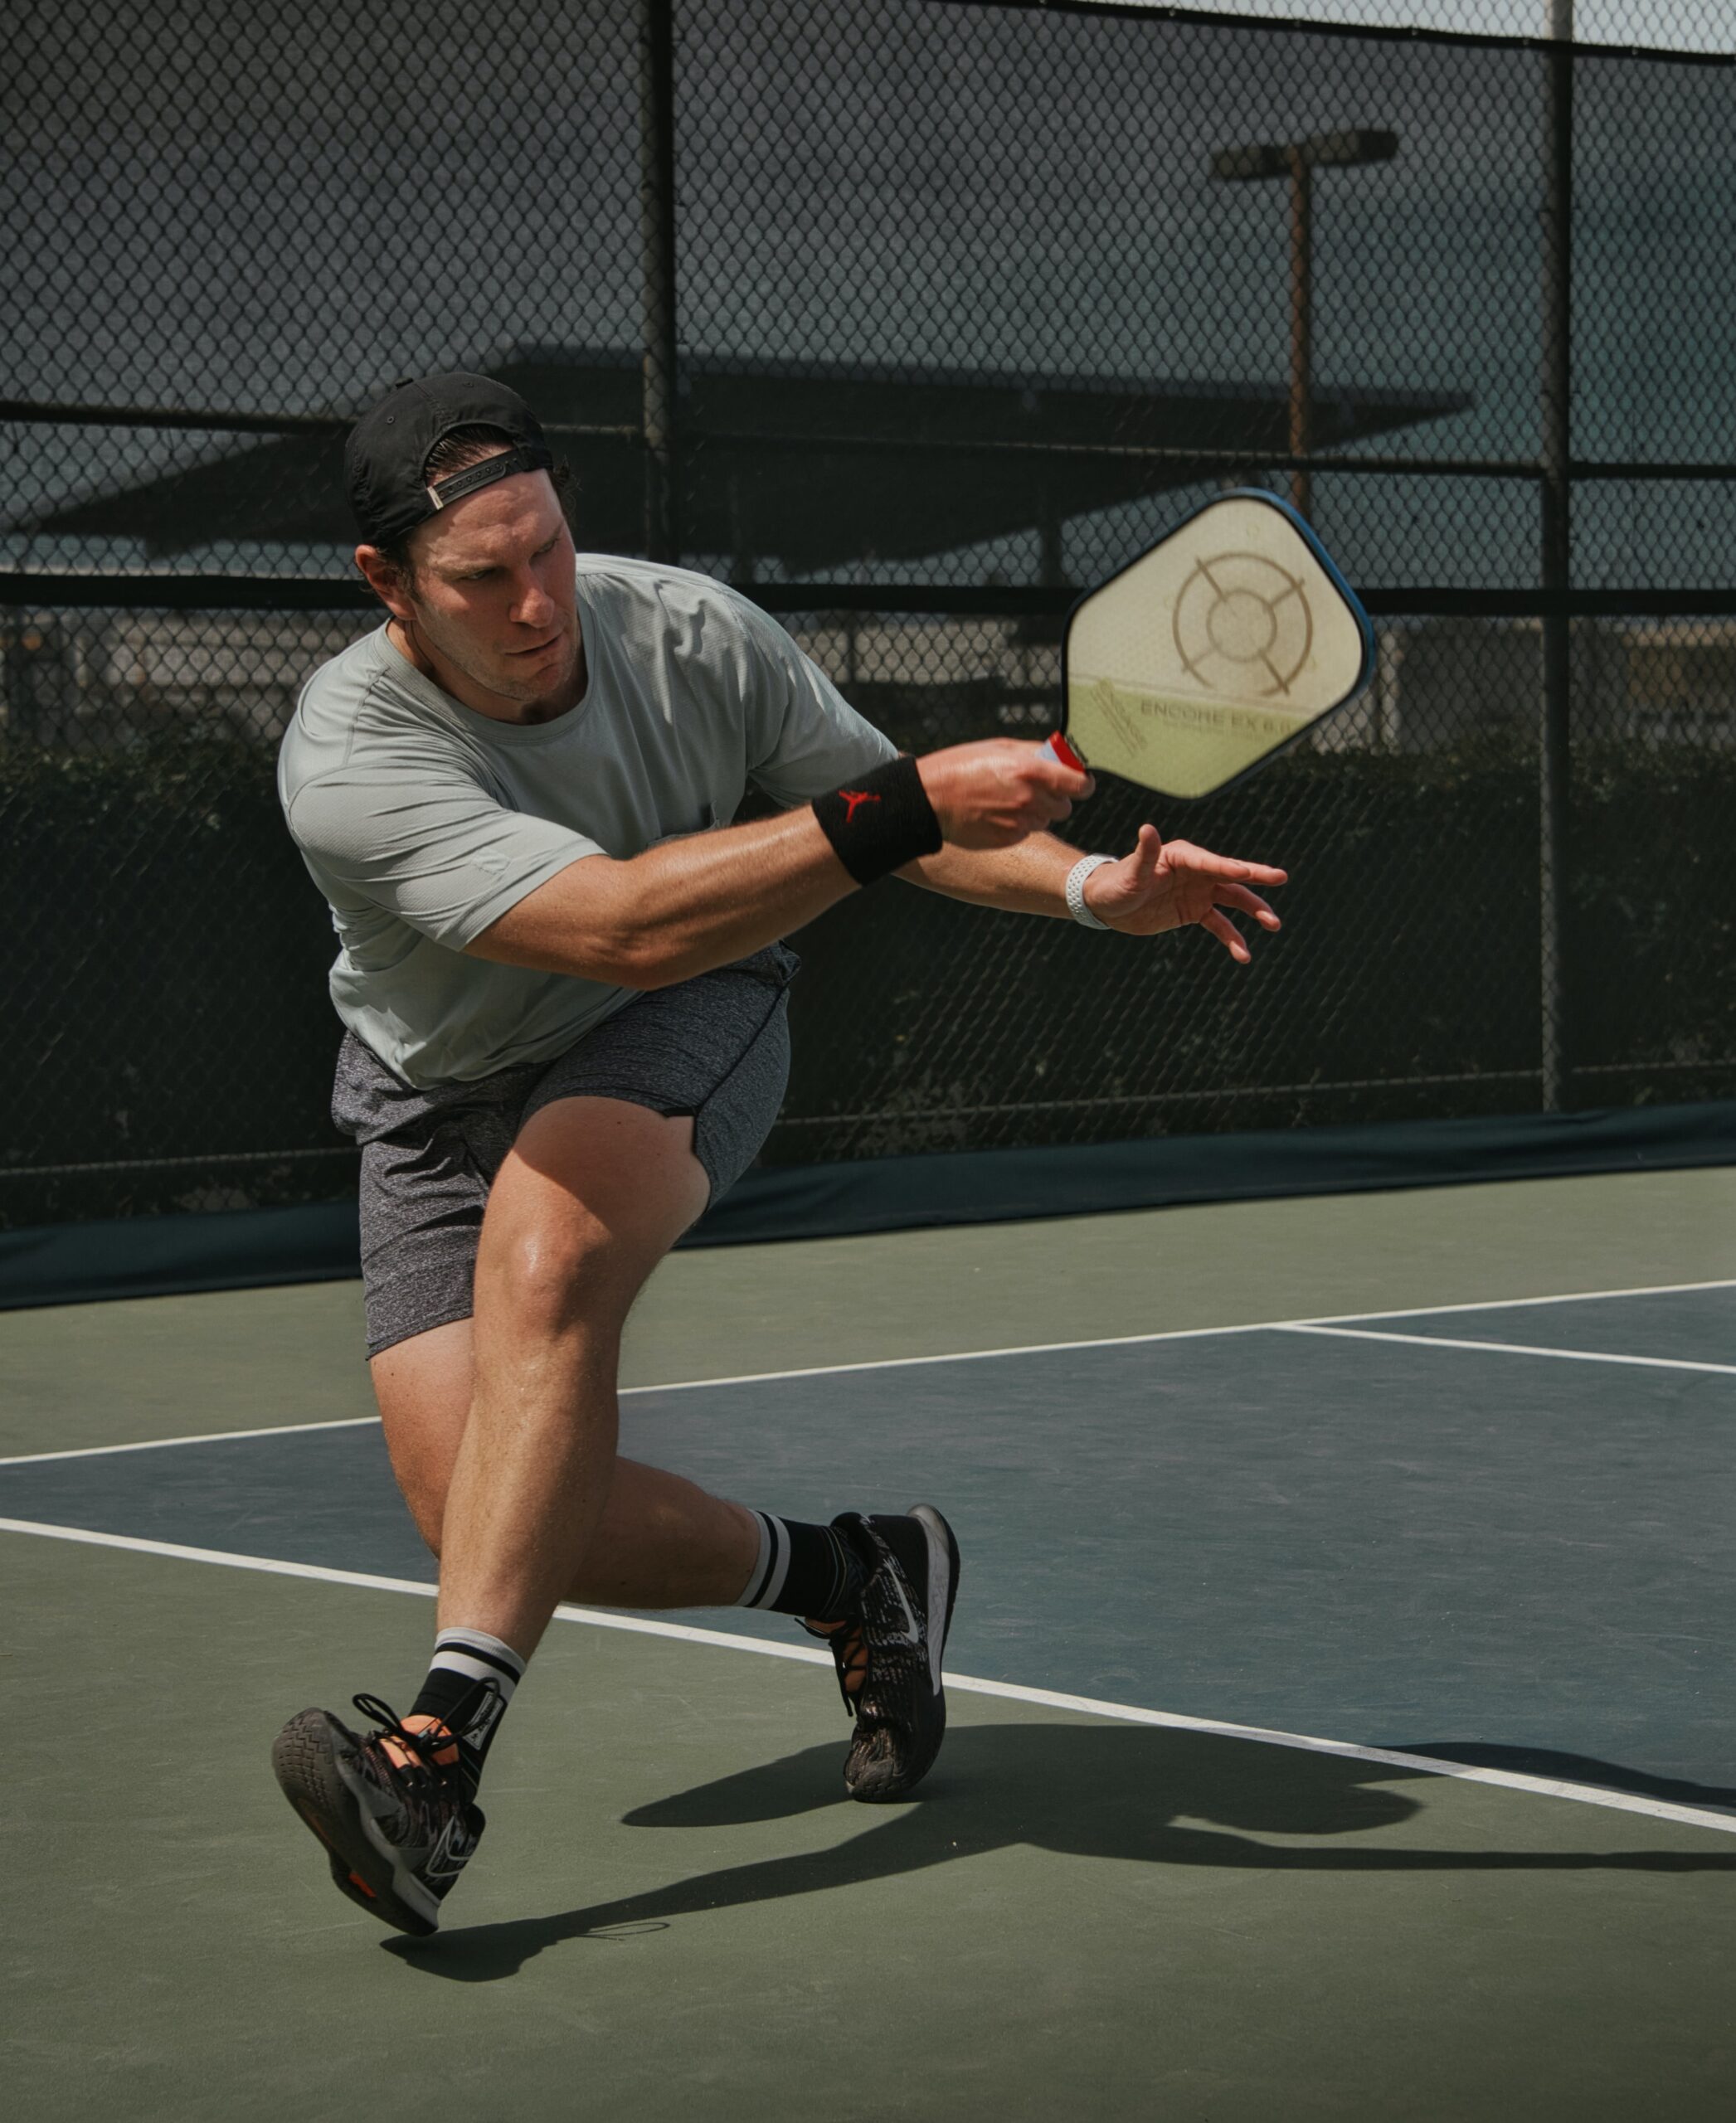 The Health Benefits of Pickleball – A New and Popular Sport